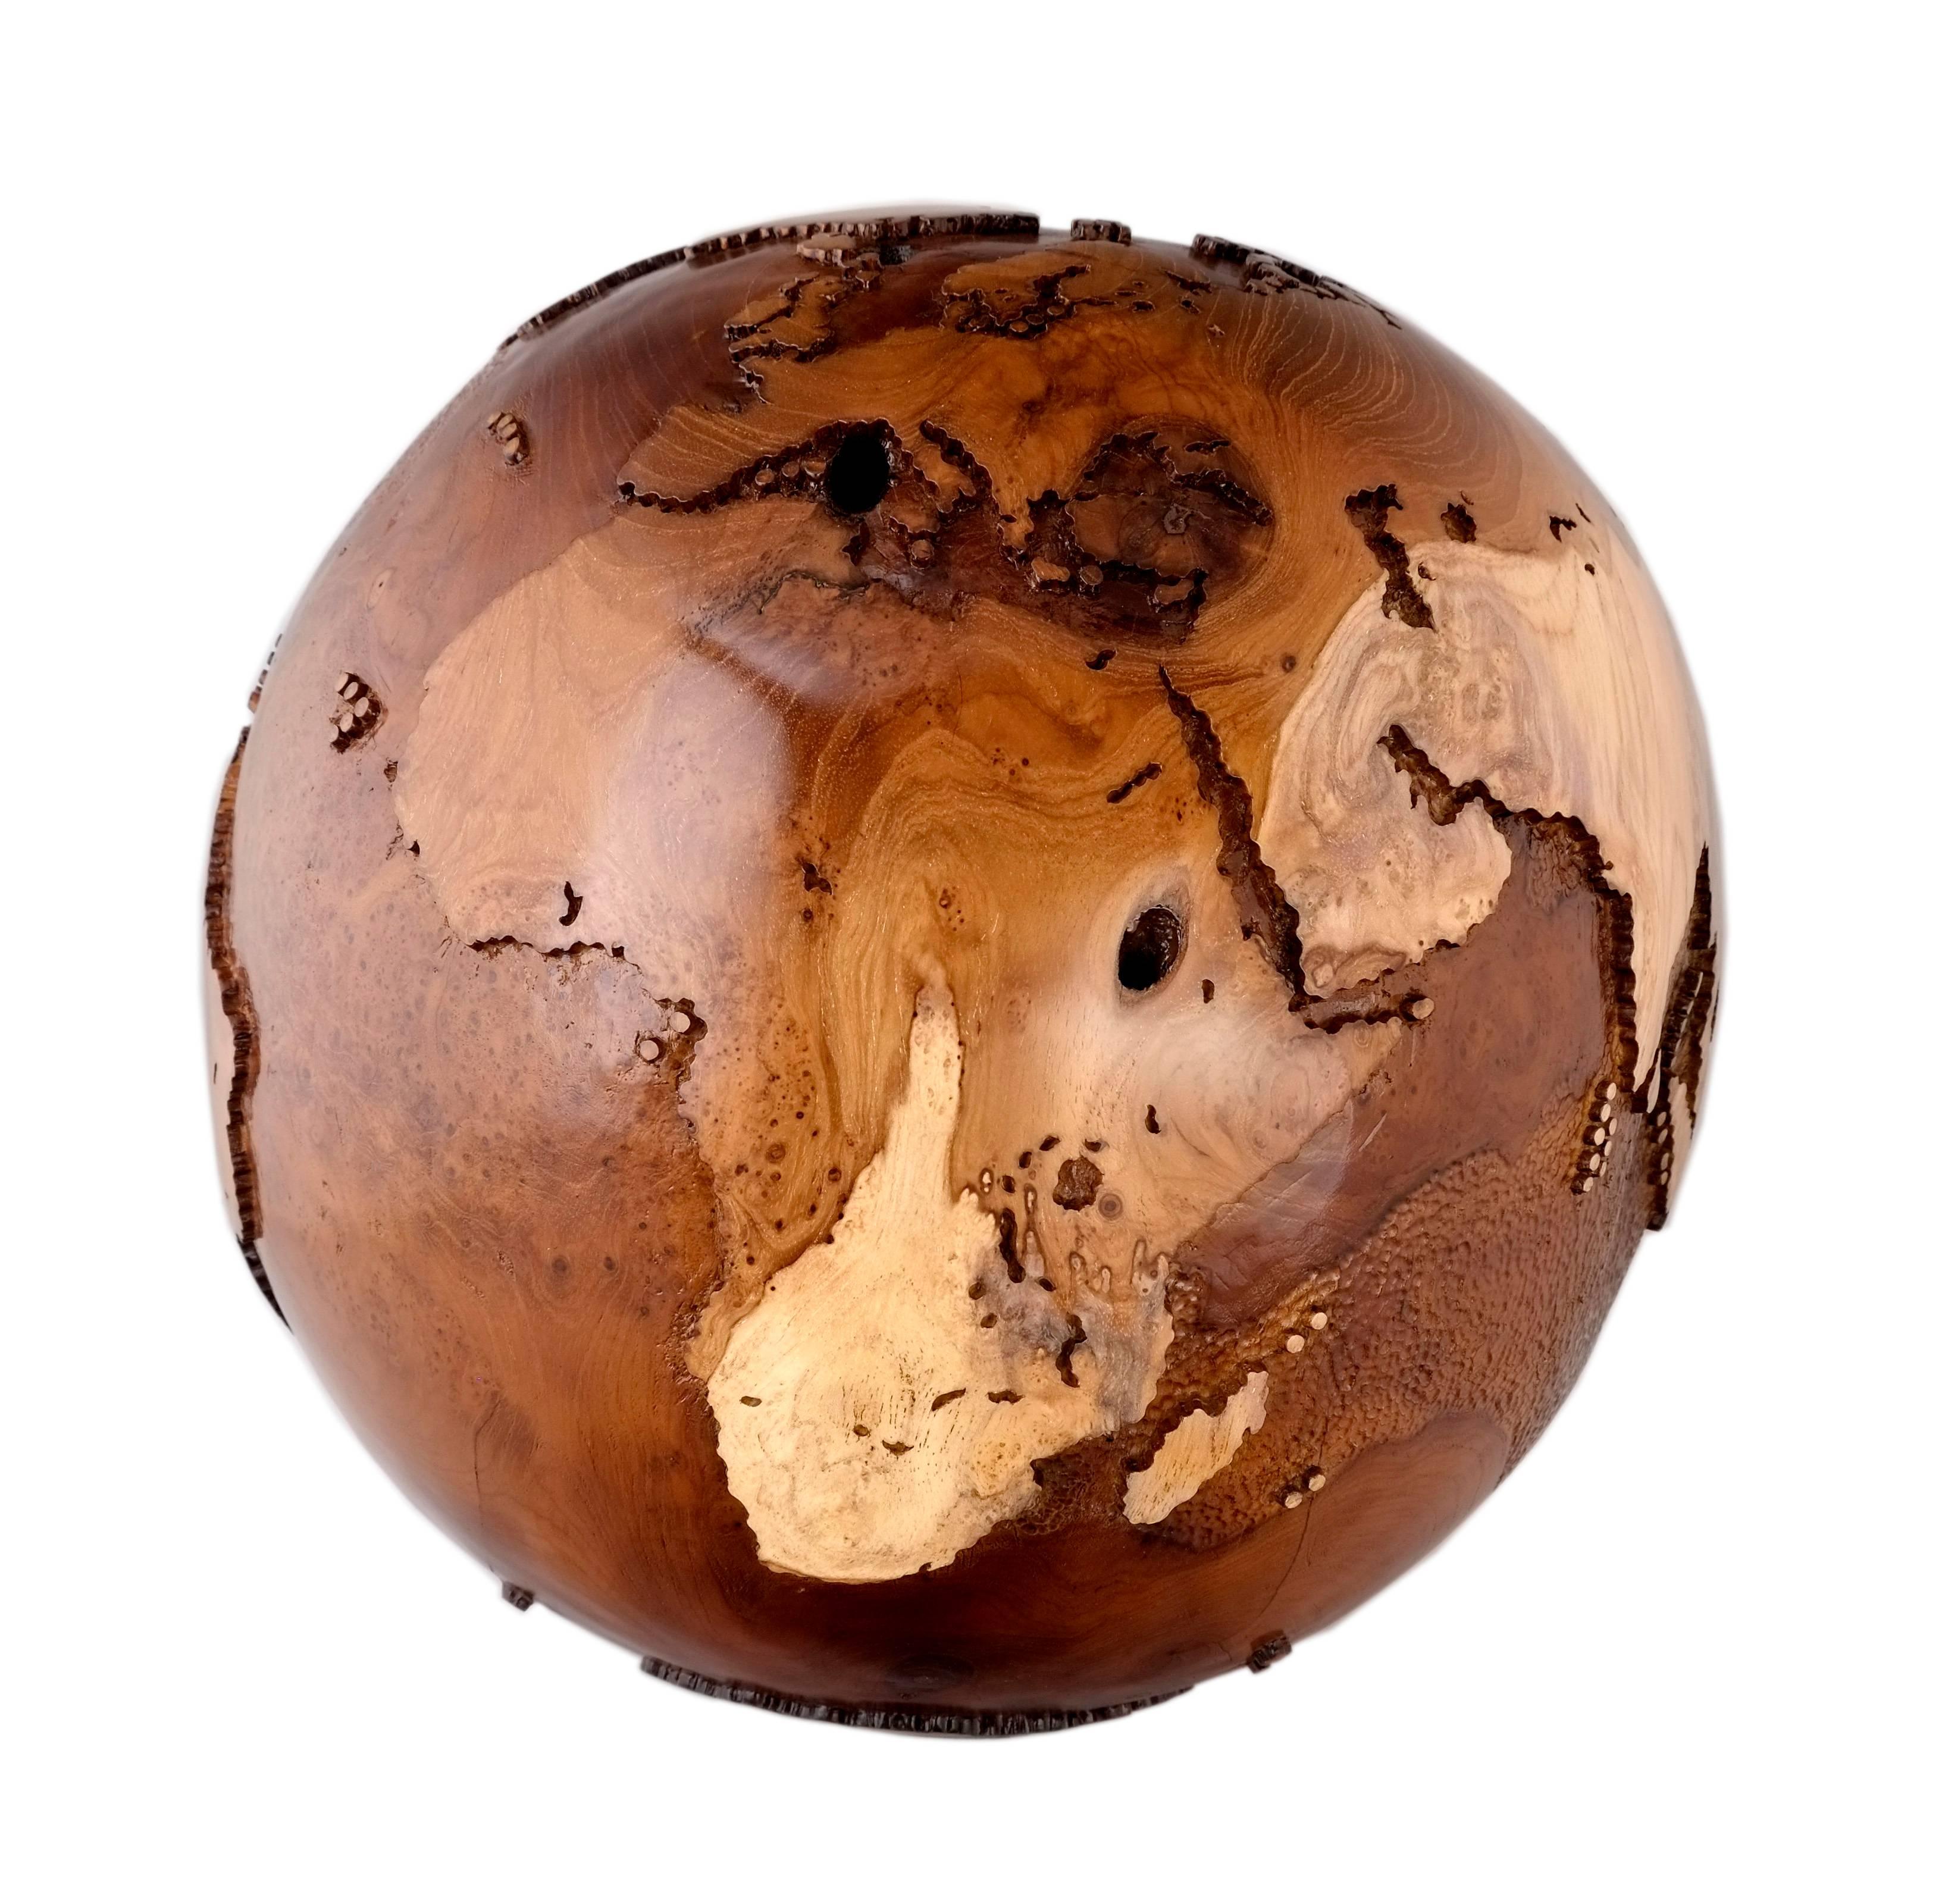 Your vibe speaks volume louder than any words could ever speak.

Eclat Vibe, hand-carved wooden globe with a burst of interesting patterns throughout the piece;
It has natural burl with swirls, eyes, and twirls that create a unique, highly